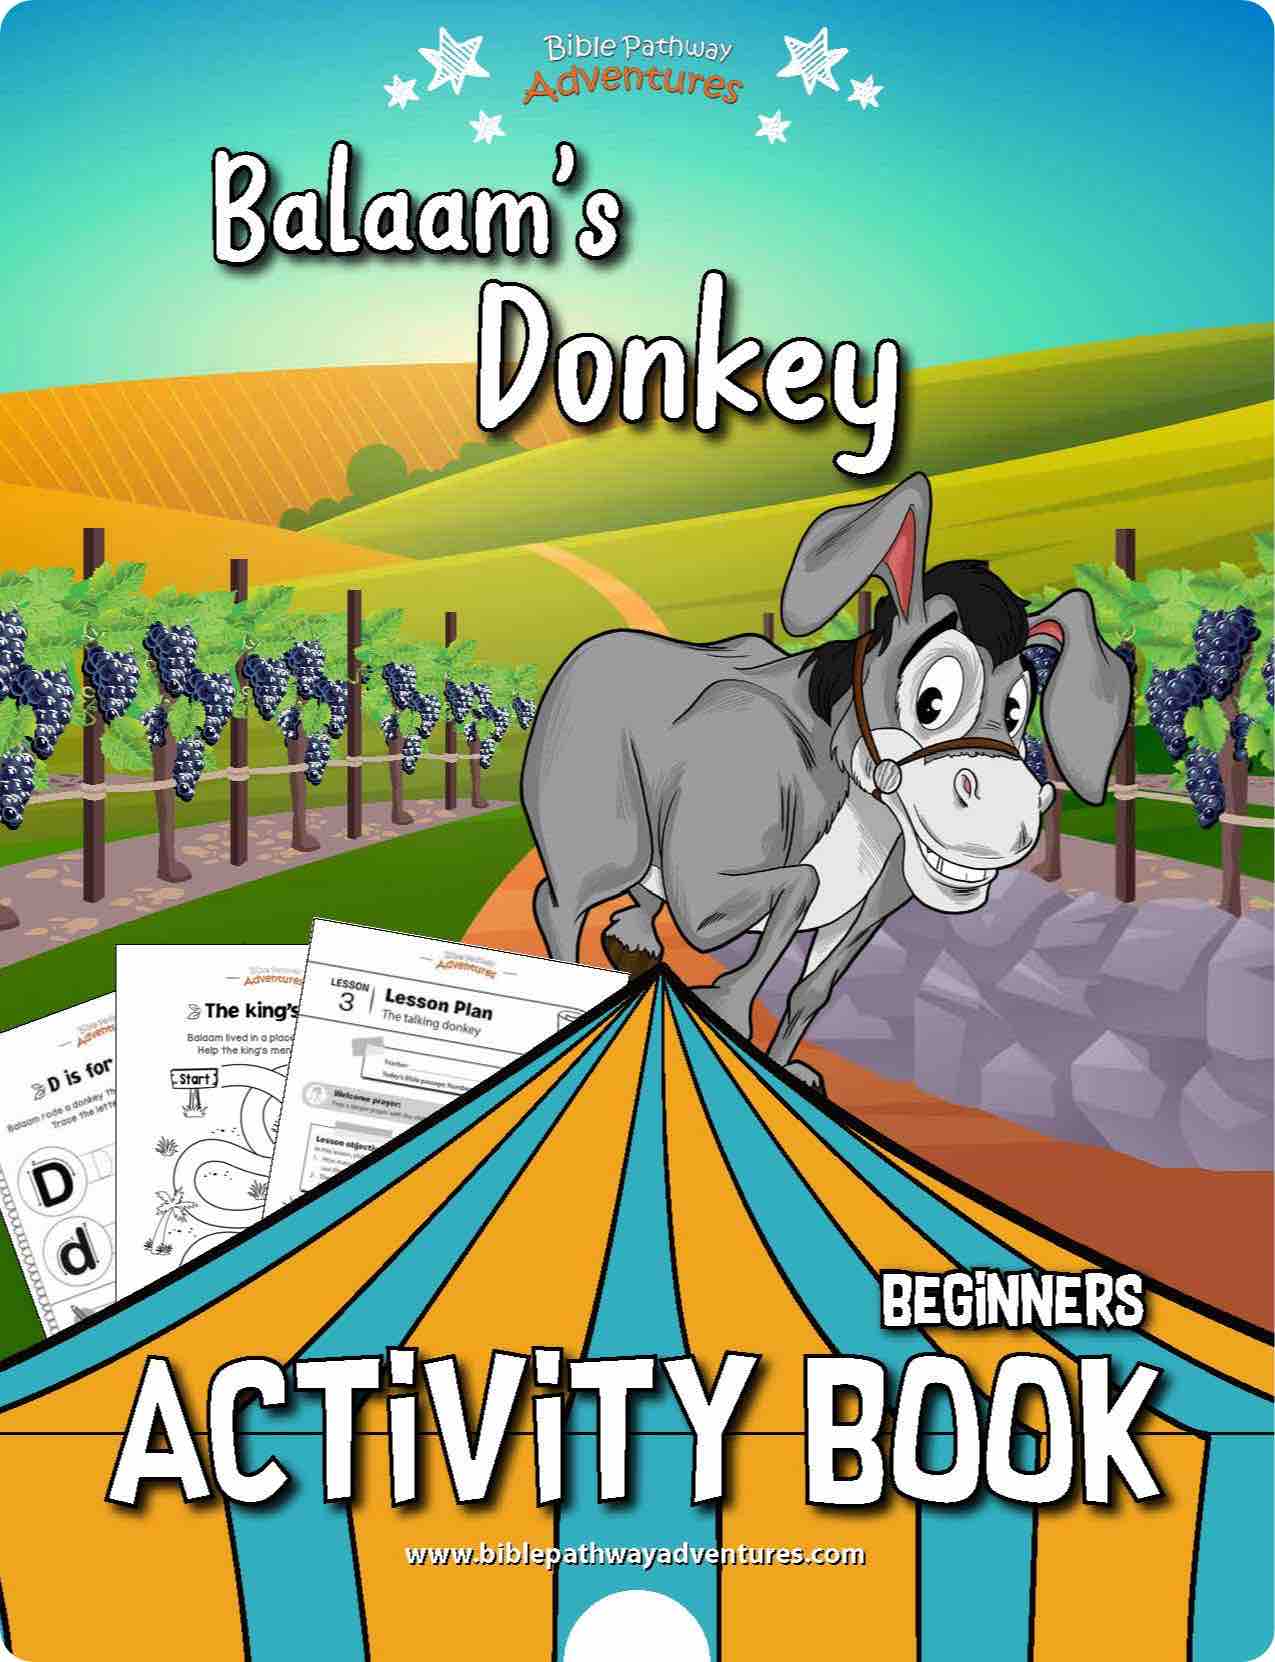 Balaam’s Donkey Activity Book for Beginners